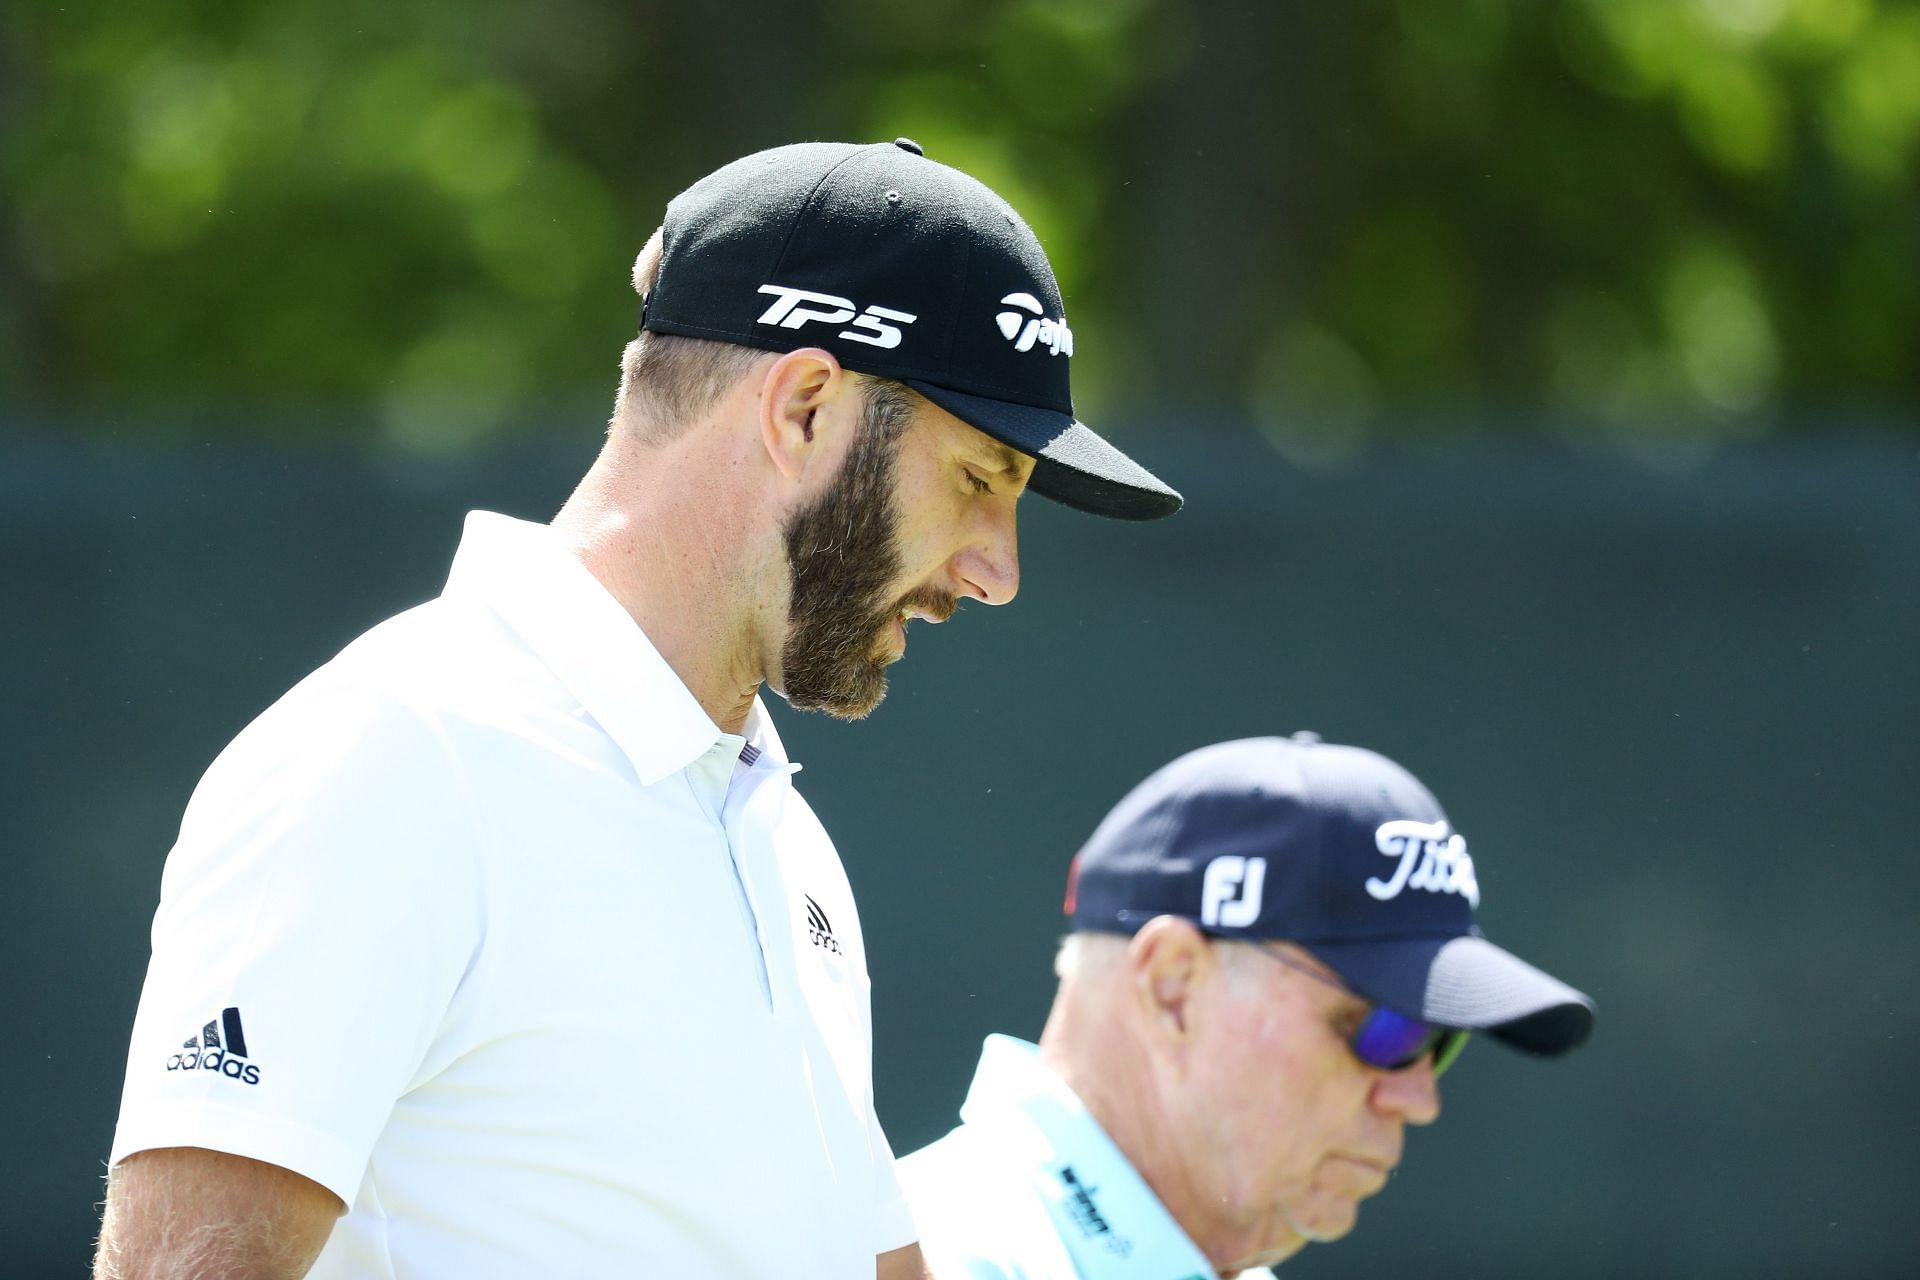 Butch Harmon with Dustin Johnson, now of LIV Golf